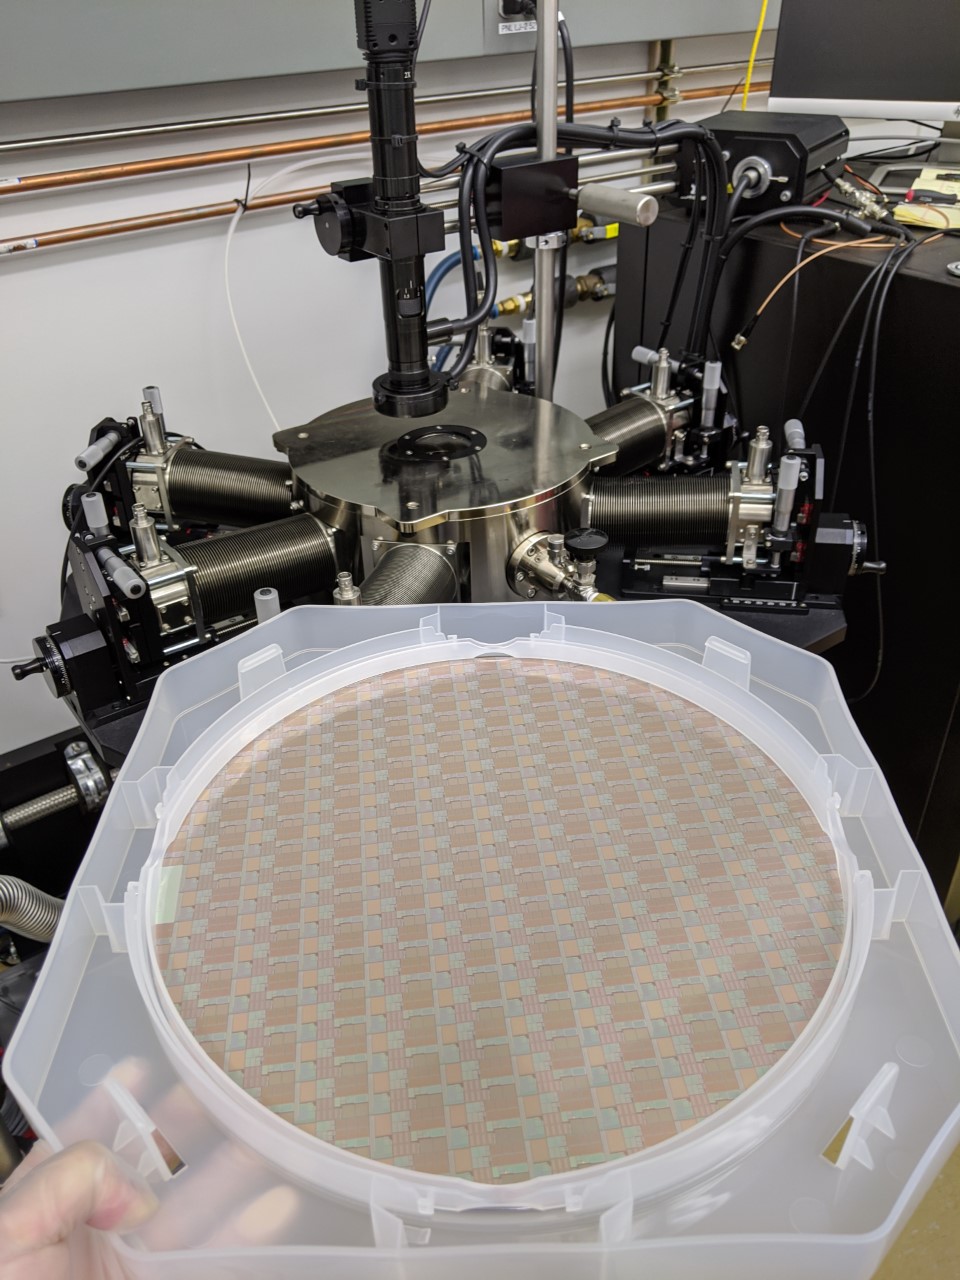 A 300mm silicon wafer with advanced memory technologies from Georgia Tech’s industry partner for device characterization to be performed at Georgia Tech’s facilities. (Photo credit: Shimeng Yu, Georgia Tech)